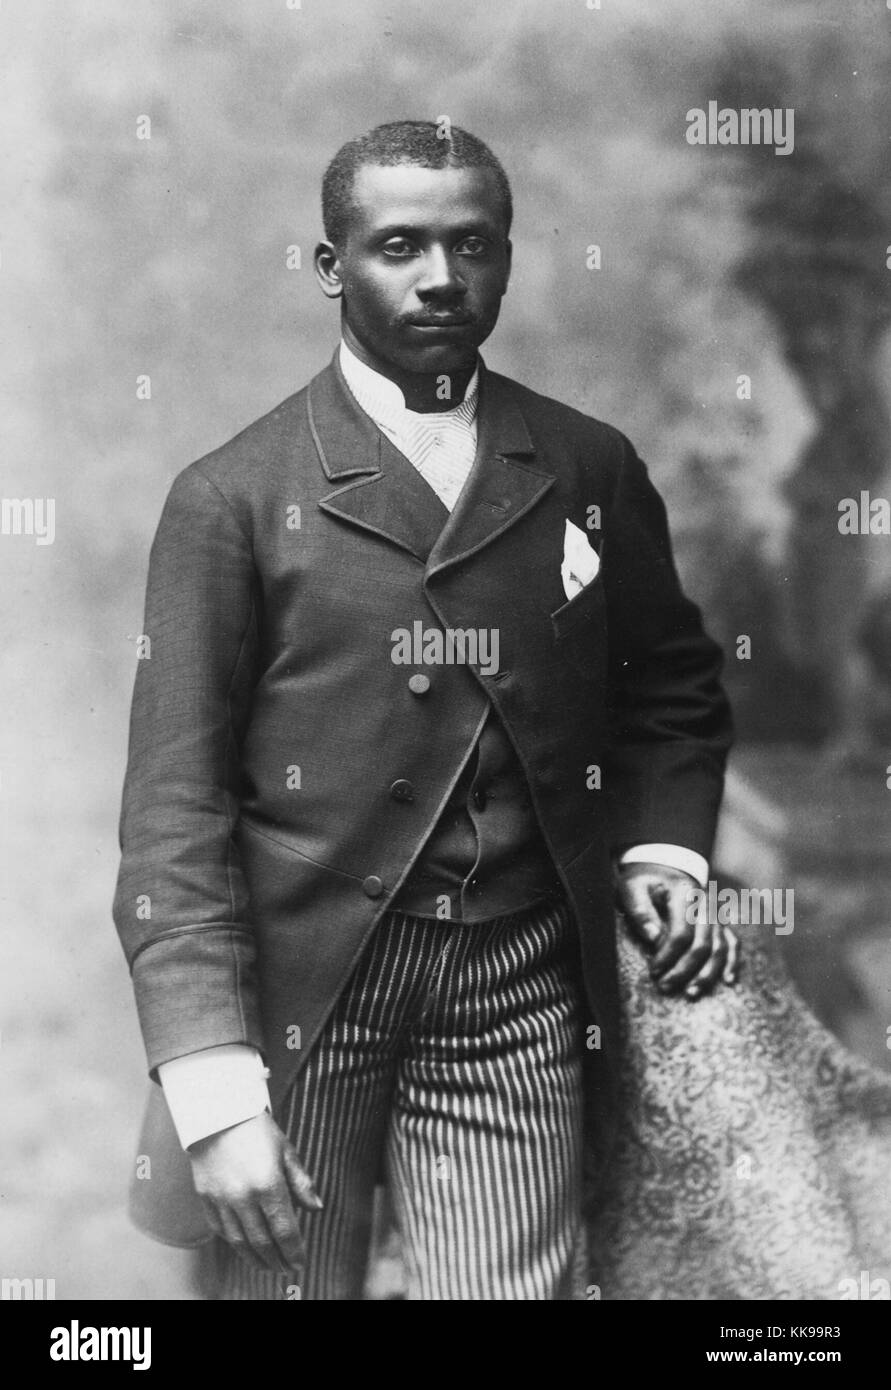 Sepia studio portrait of an African-American man, three quarter length, dressed in jacket, vest, tie and striped pants, 1900. From the New York Public Library. Stock Photo